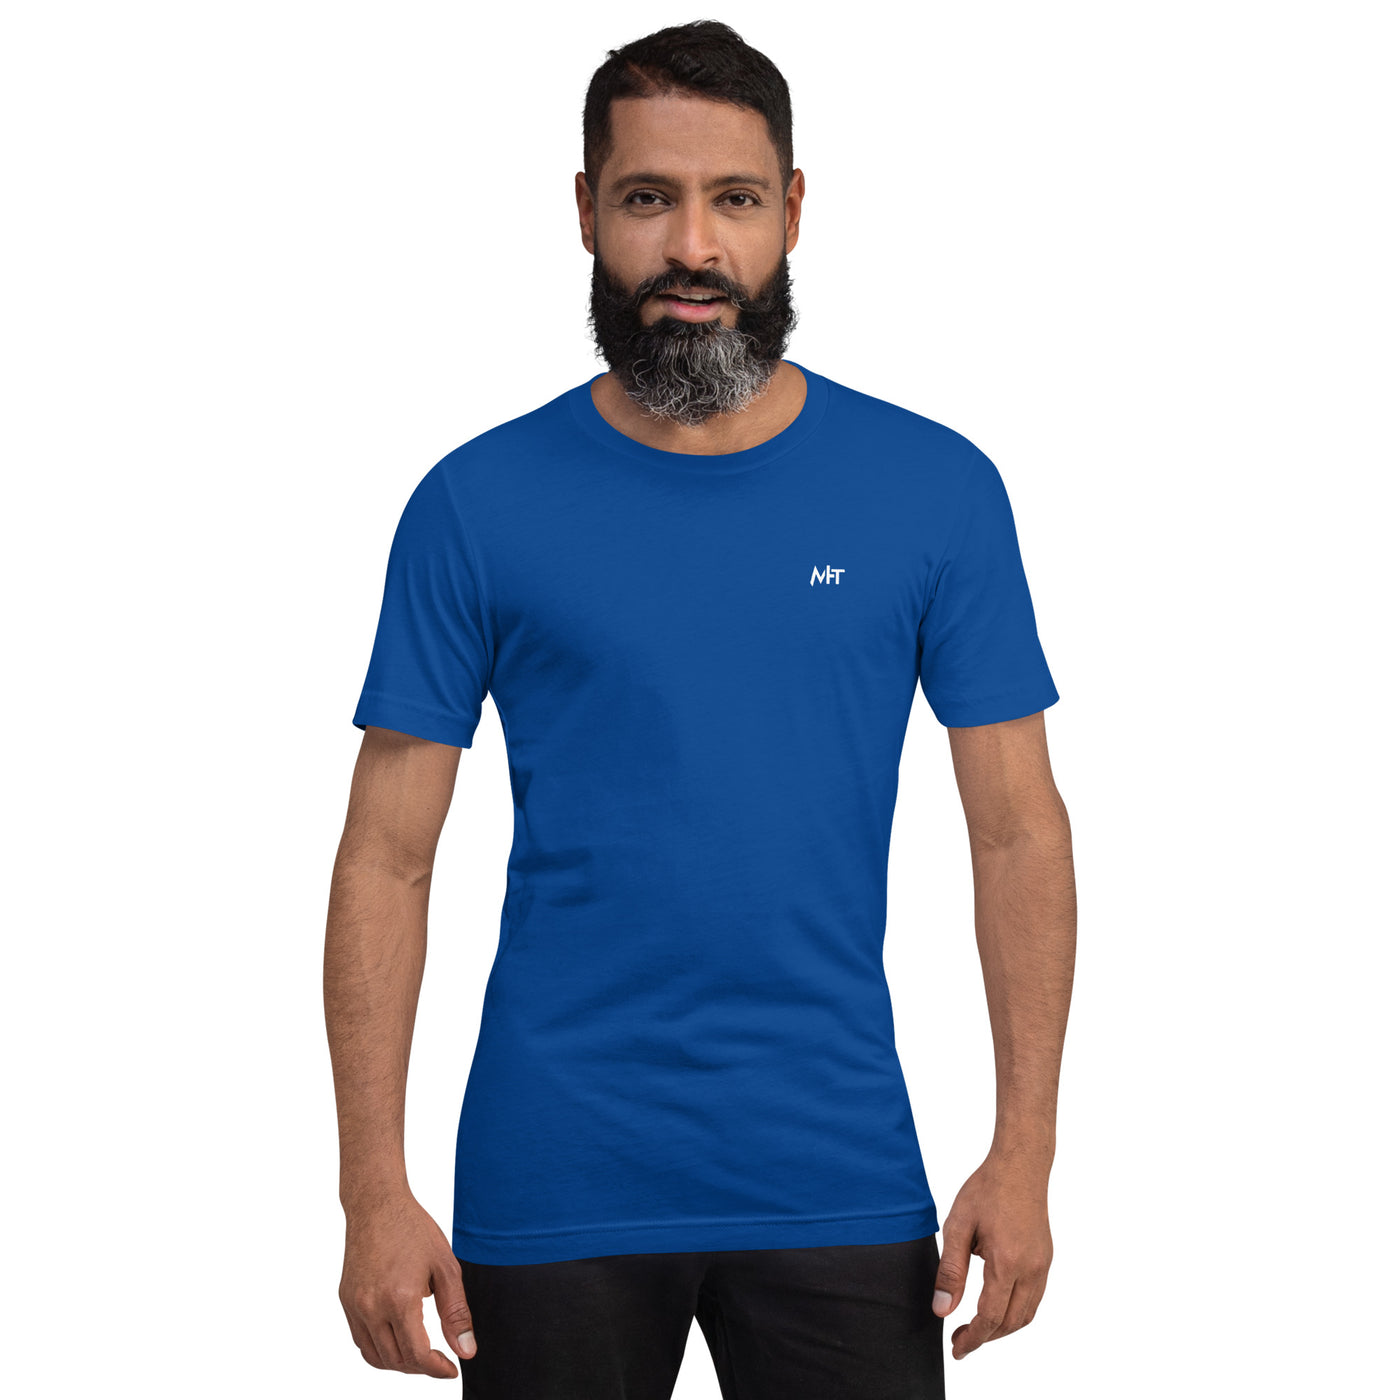 Computers are fast; Programmers -Unisex t-shirt